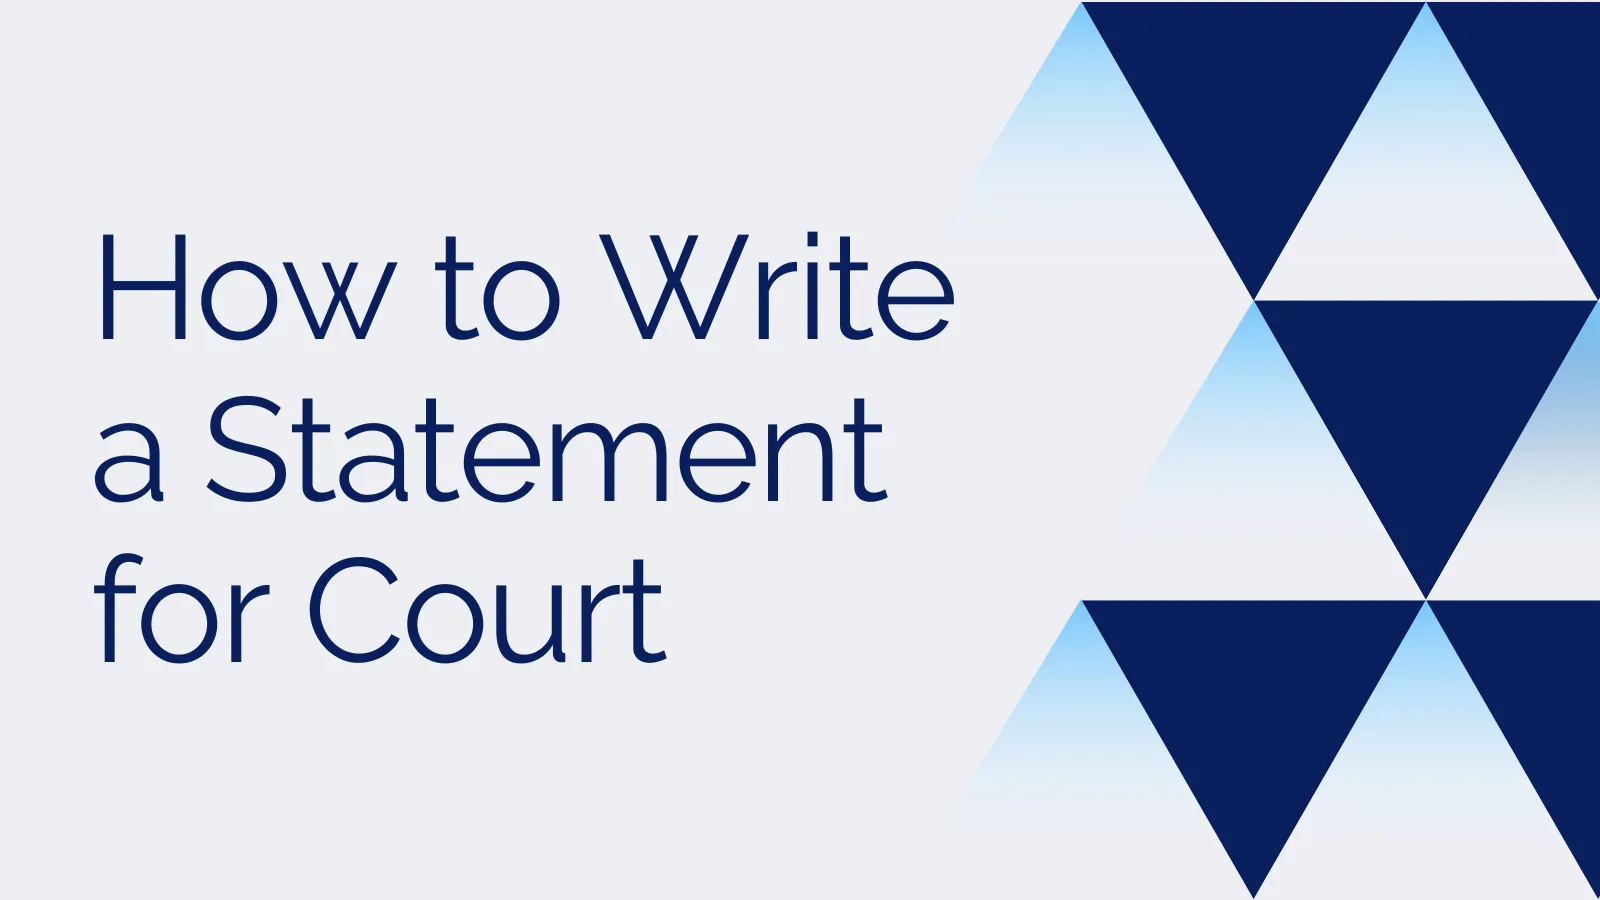 How to Write a Statement for Court